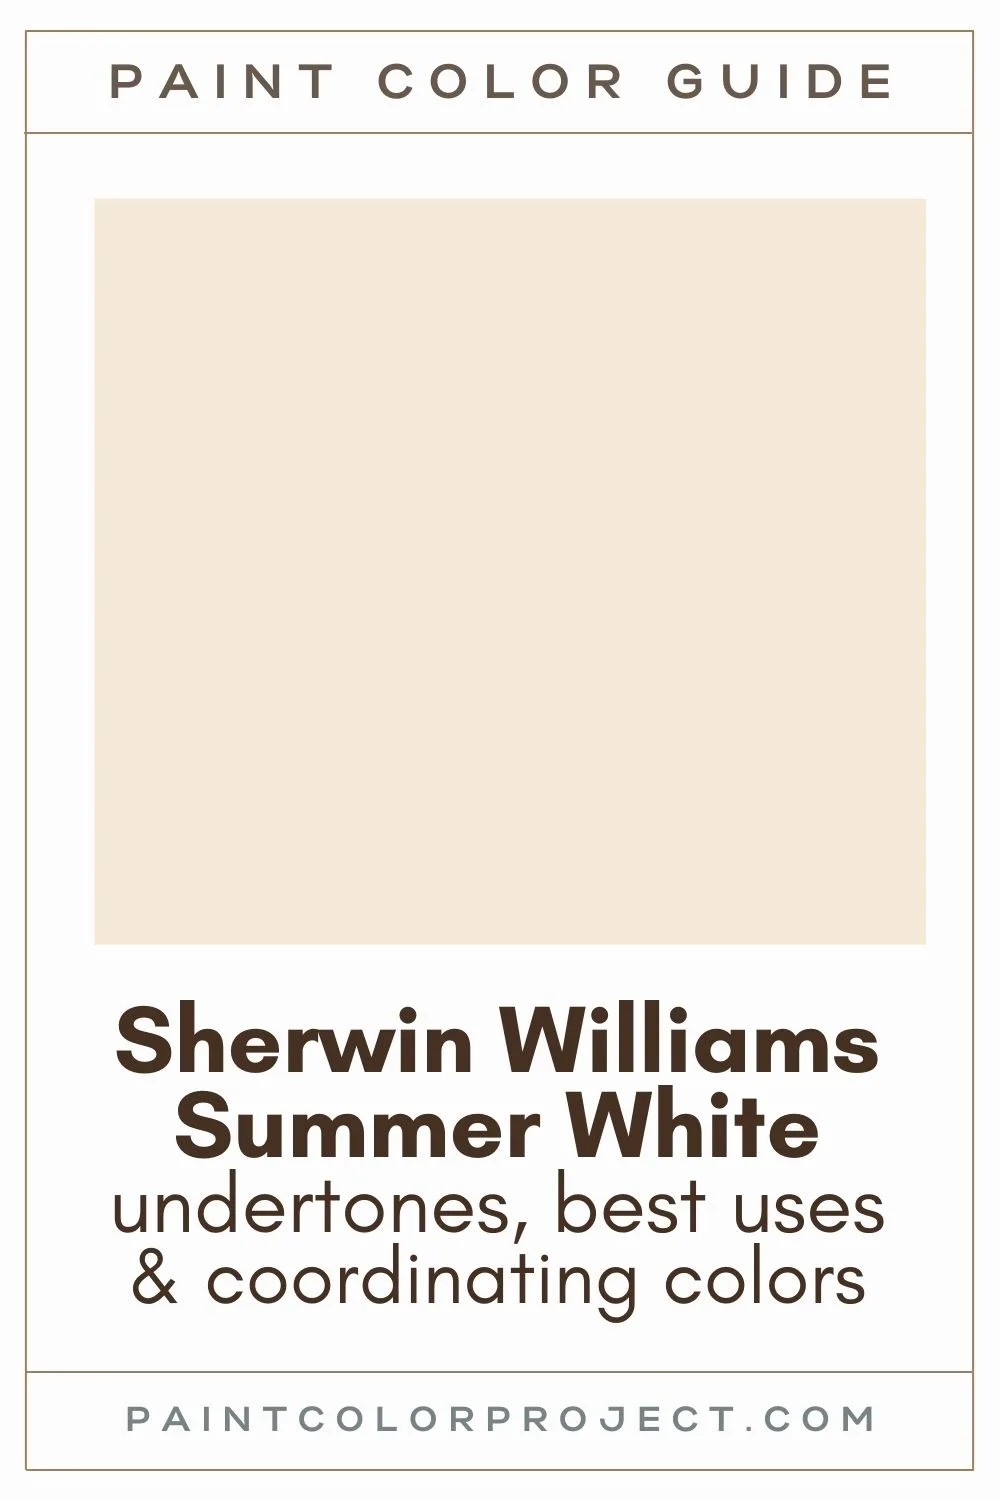 Sherwin Williams Summer White Paint Color Guide.